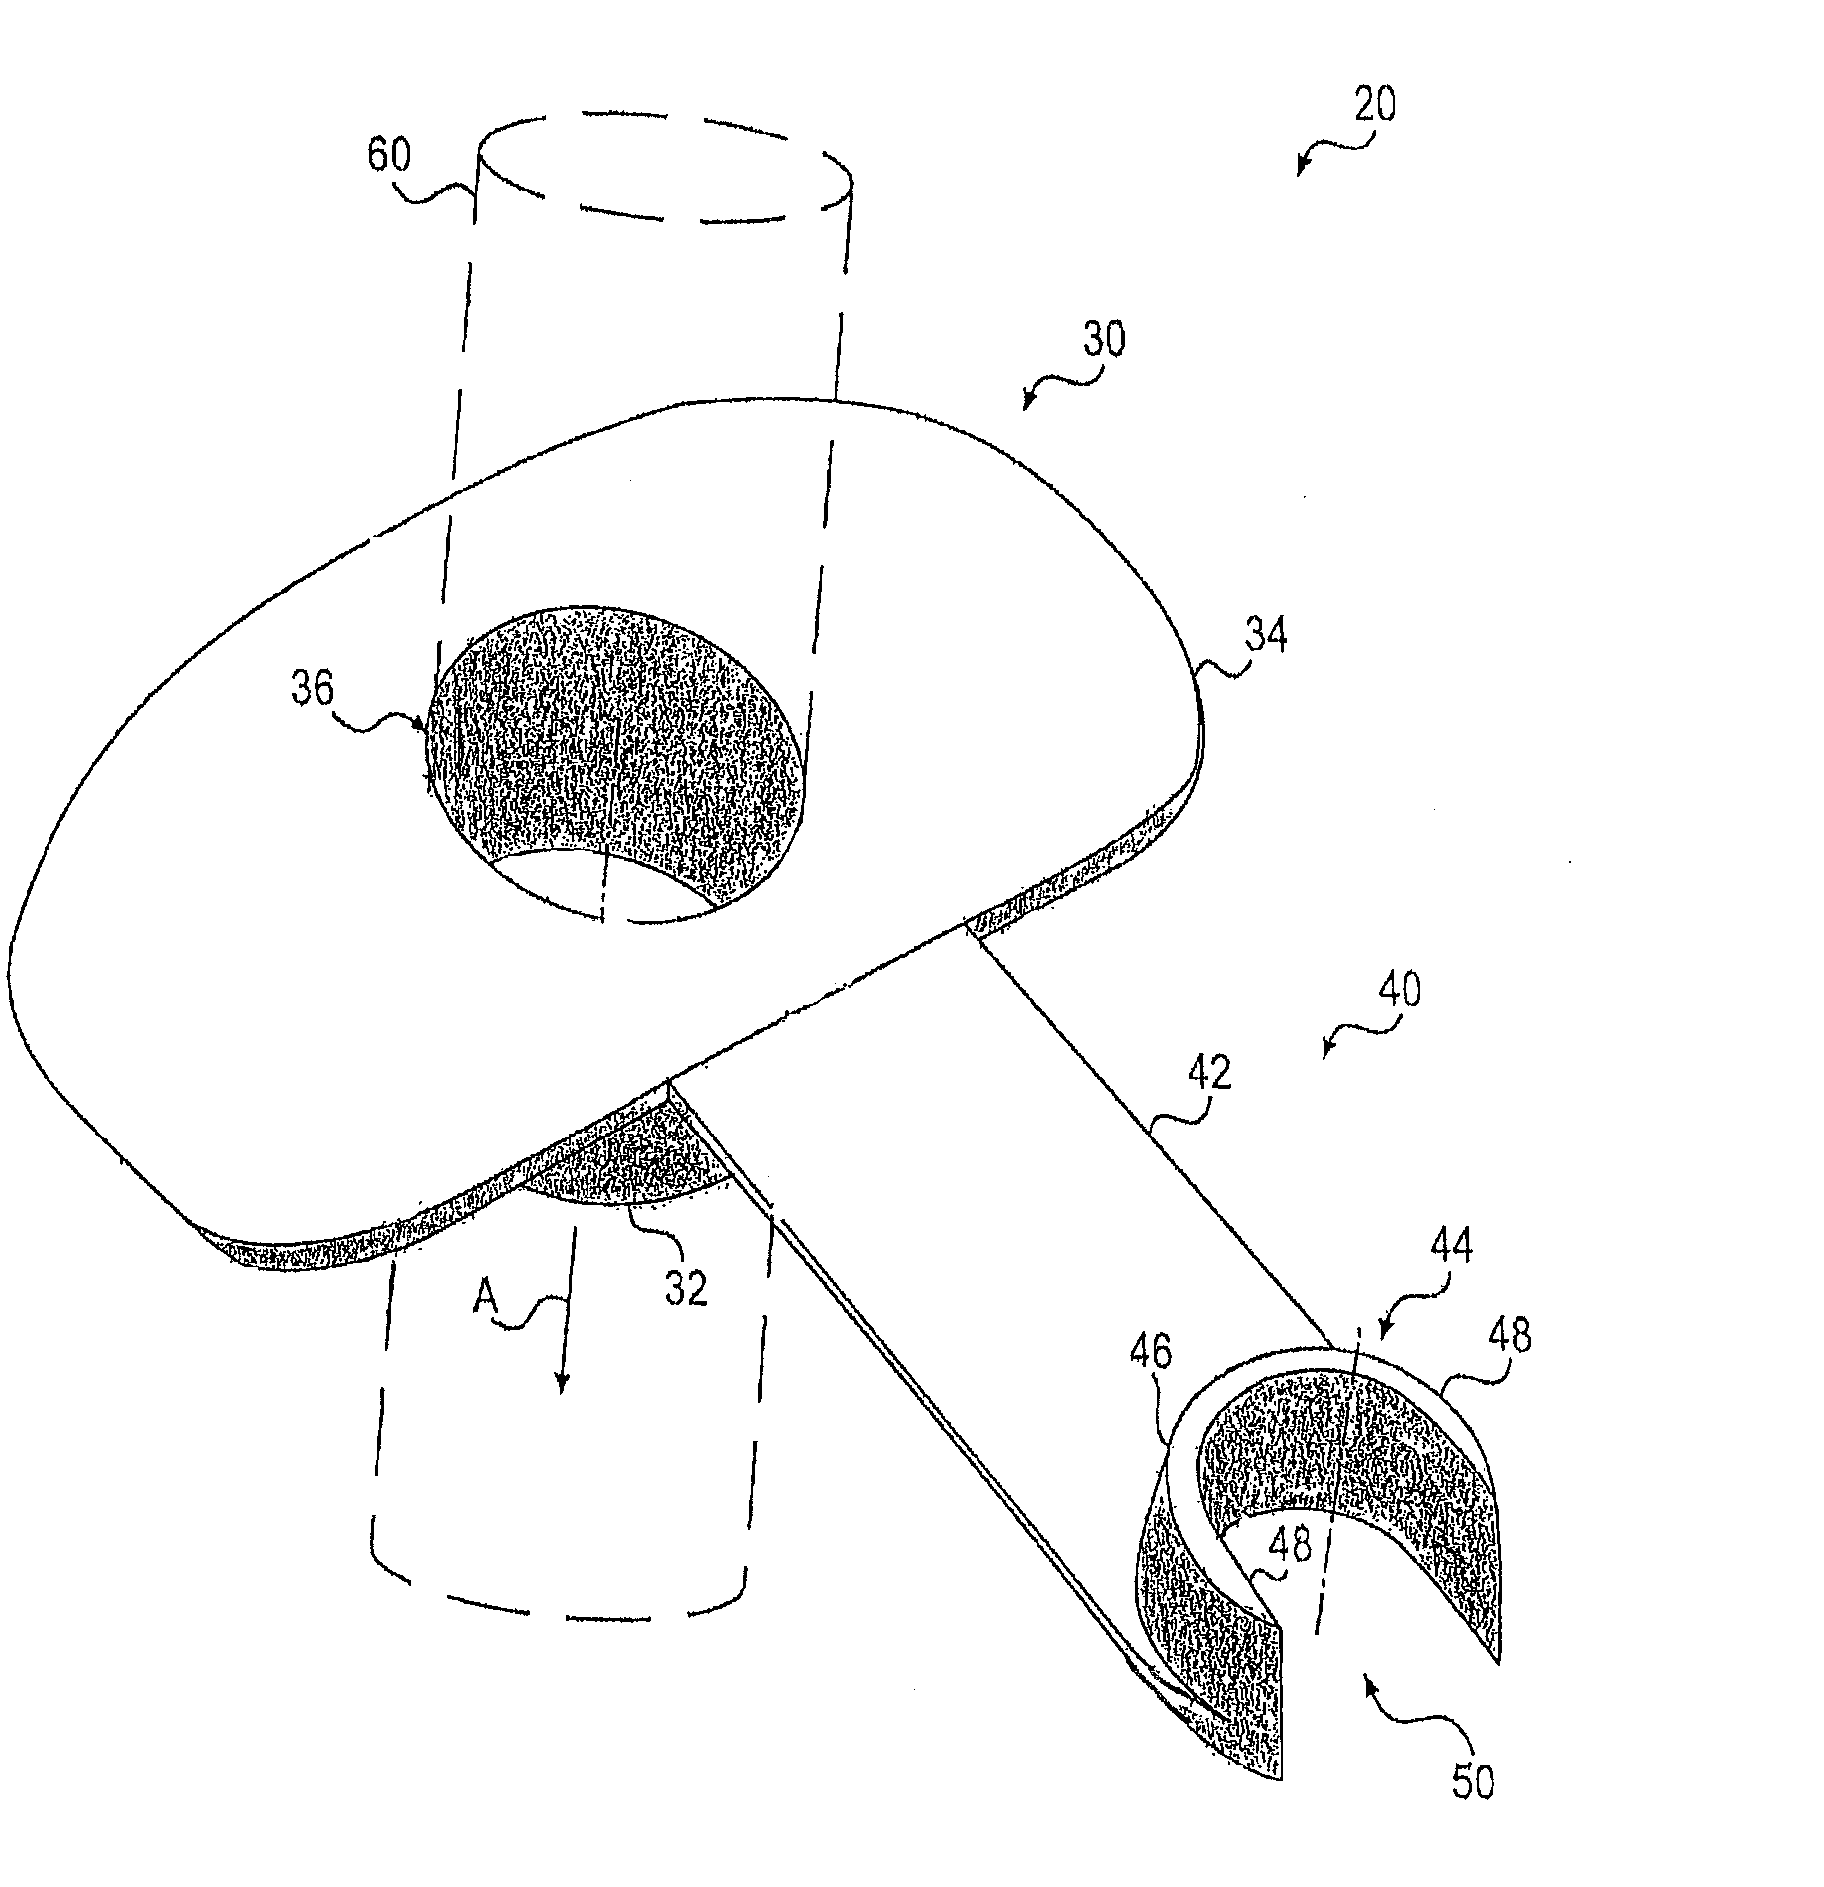 Endoscopic bite guard and related methods of use